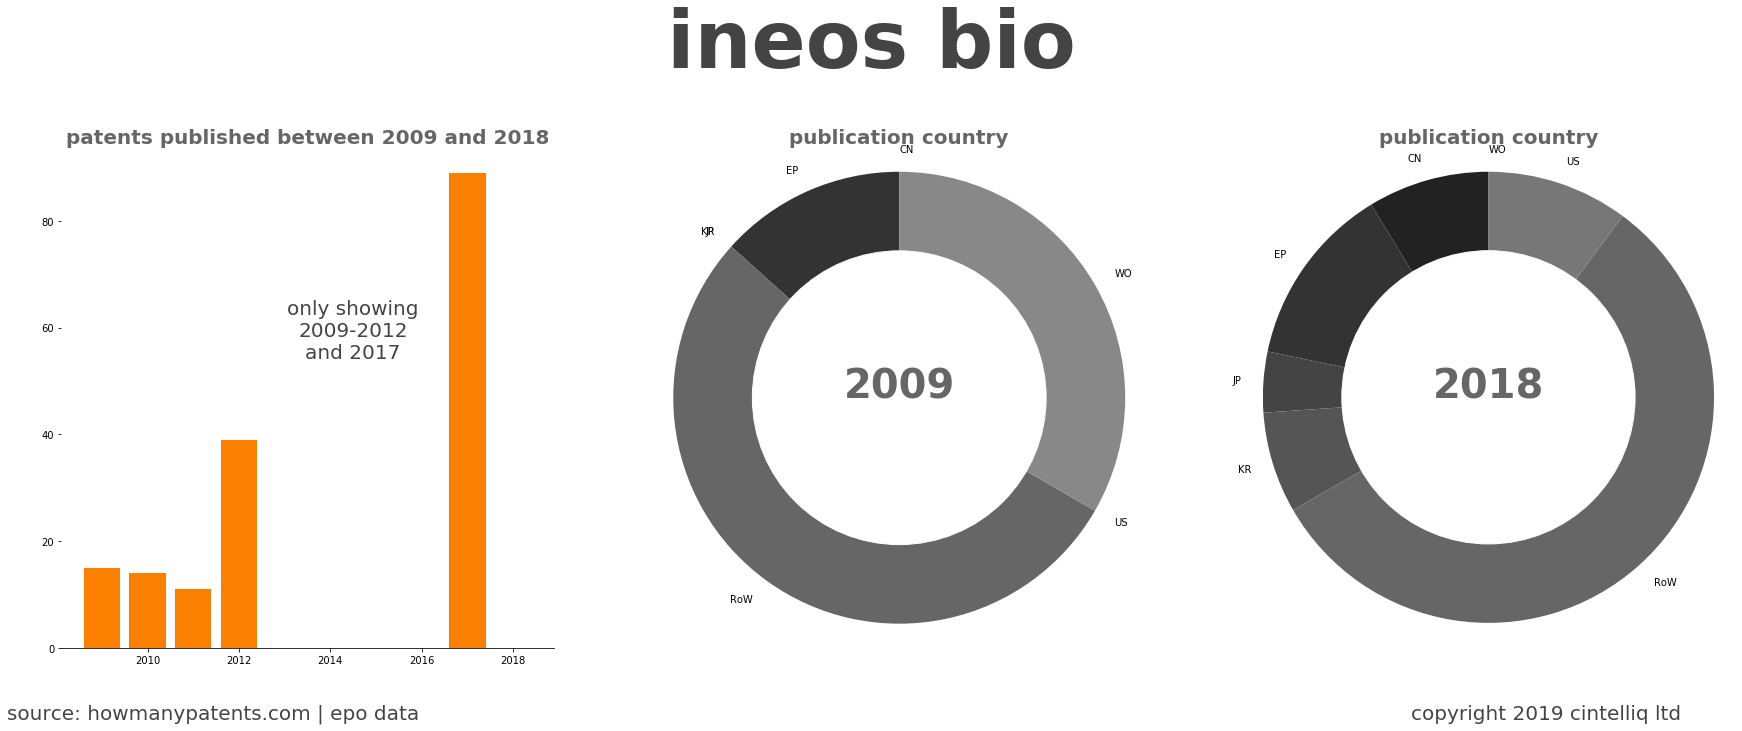 summary of patents for Ineos Bio